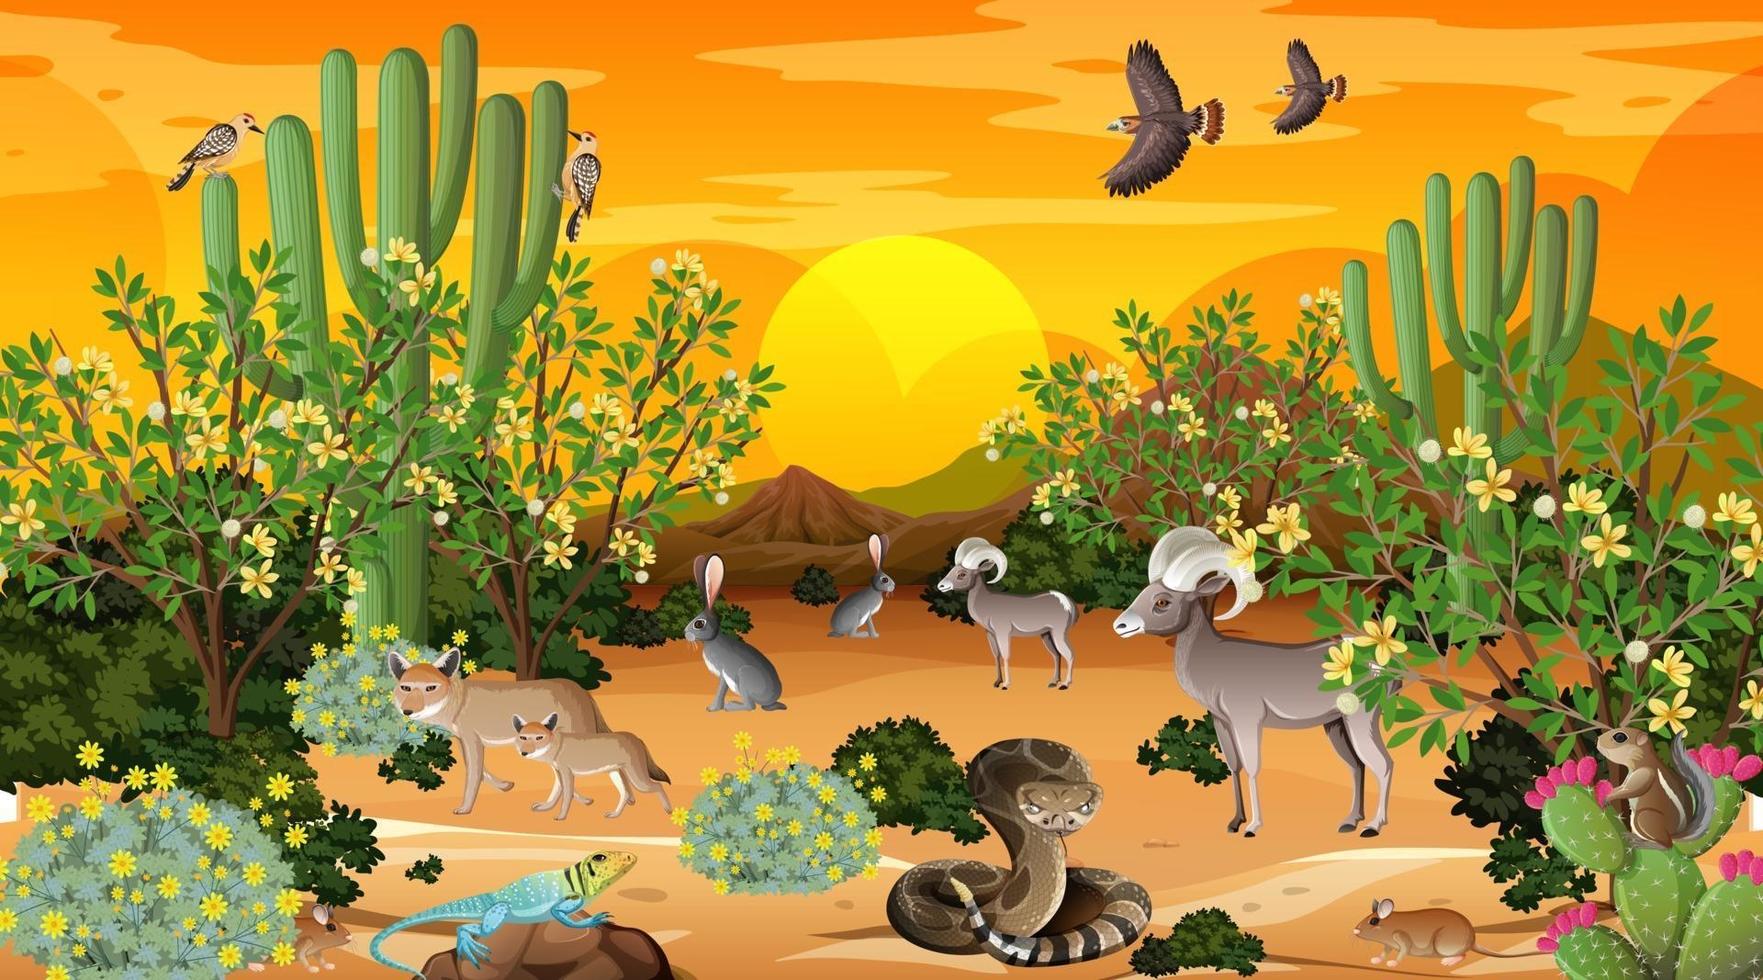 Desert forest landscape at sunset time scene with wild animals vector